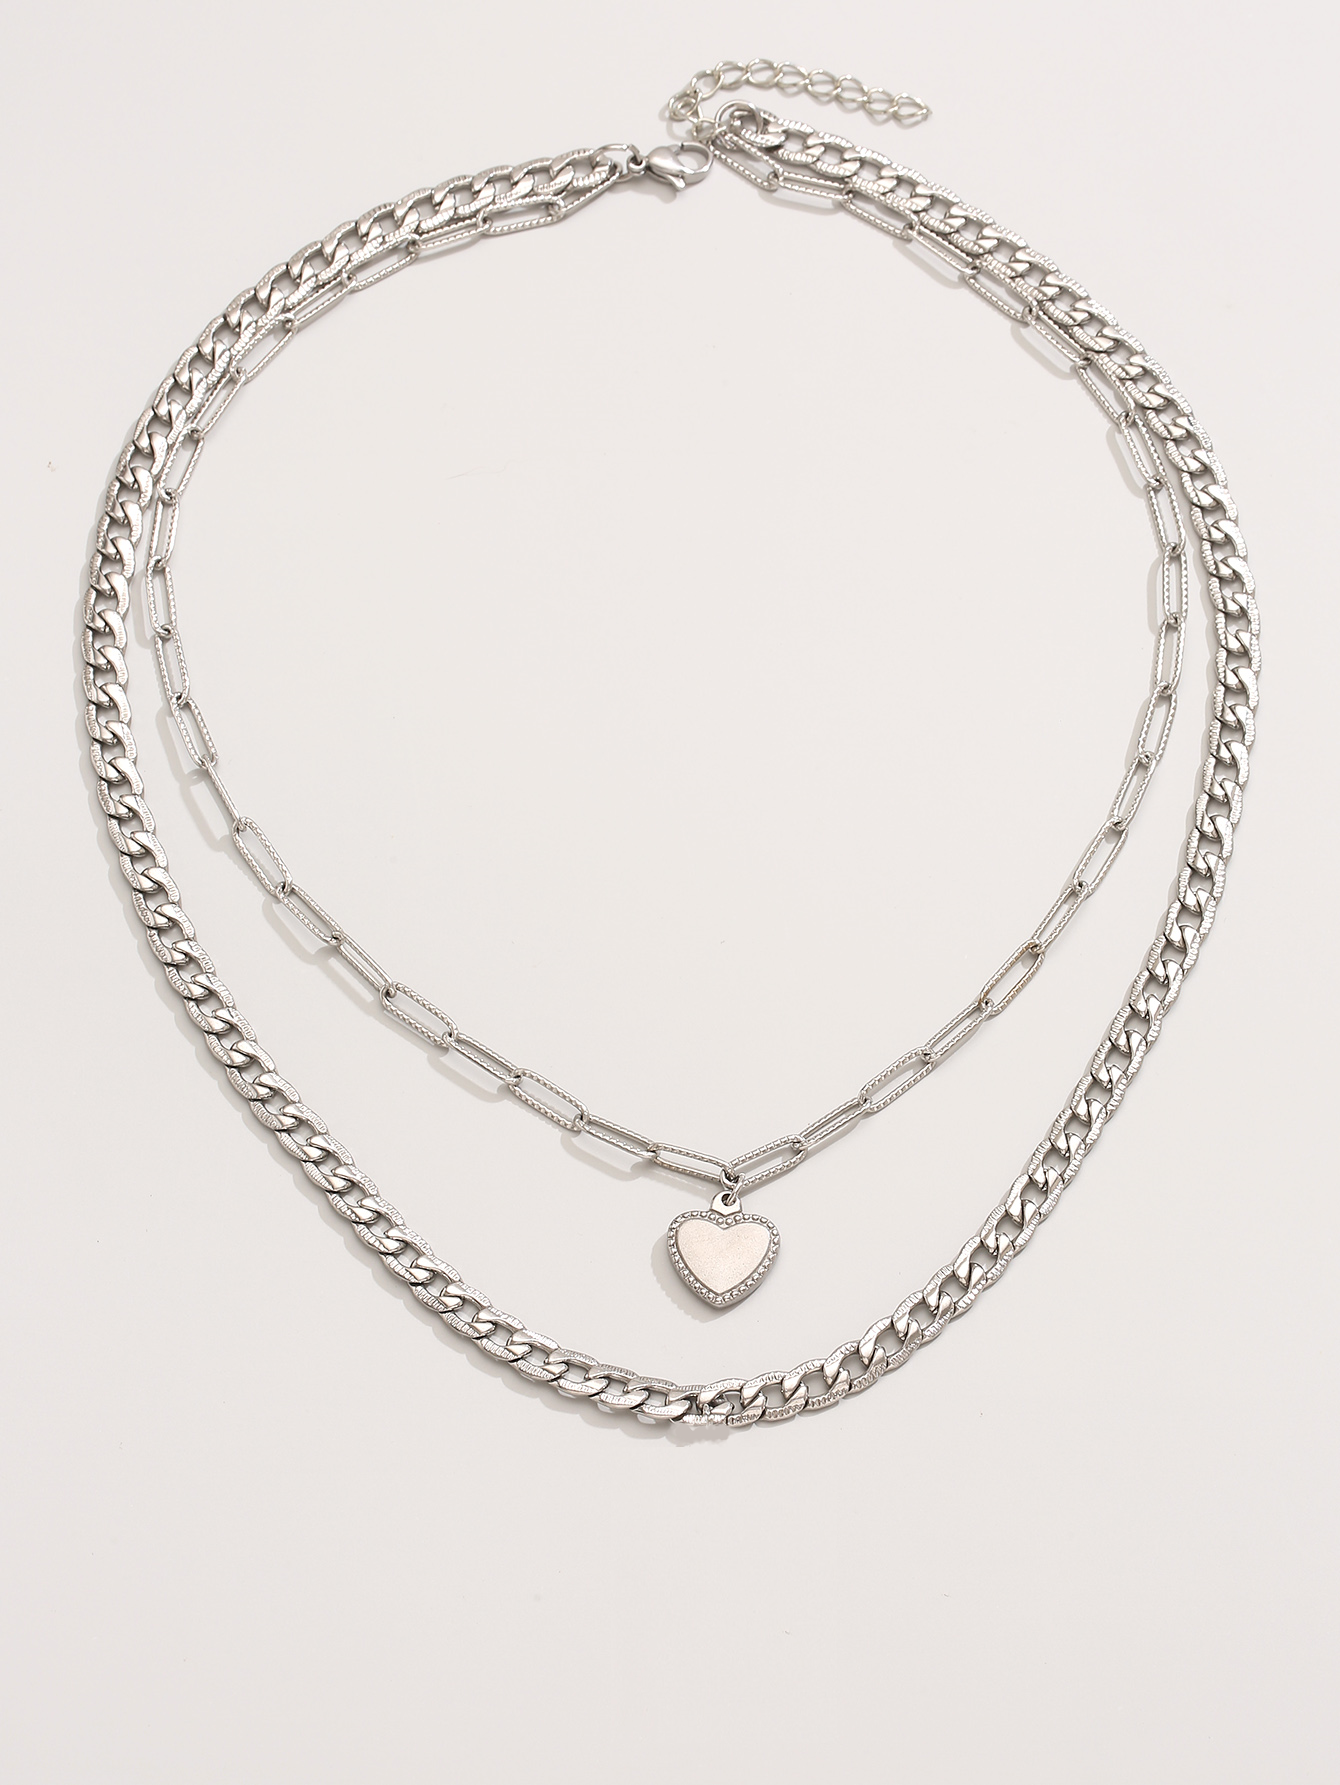 10pc_Stylish Silver Double-layer Cable Chain with Heart Pendant_UK Seller_GCJ228